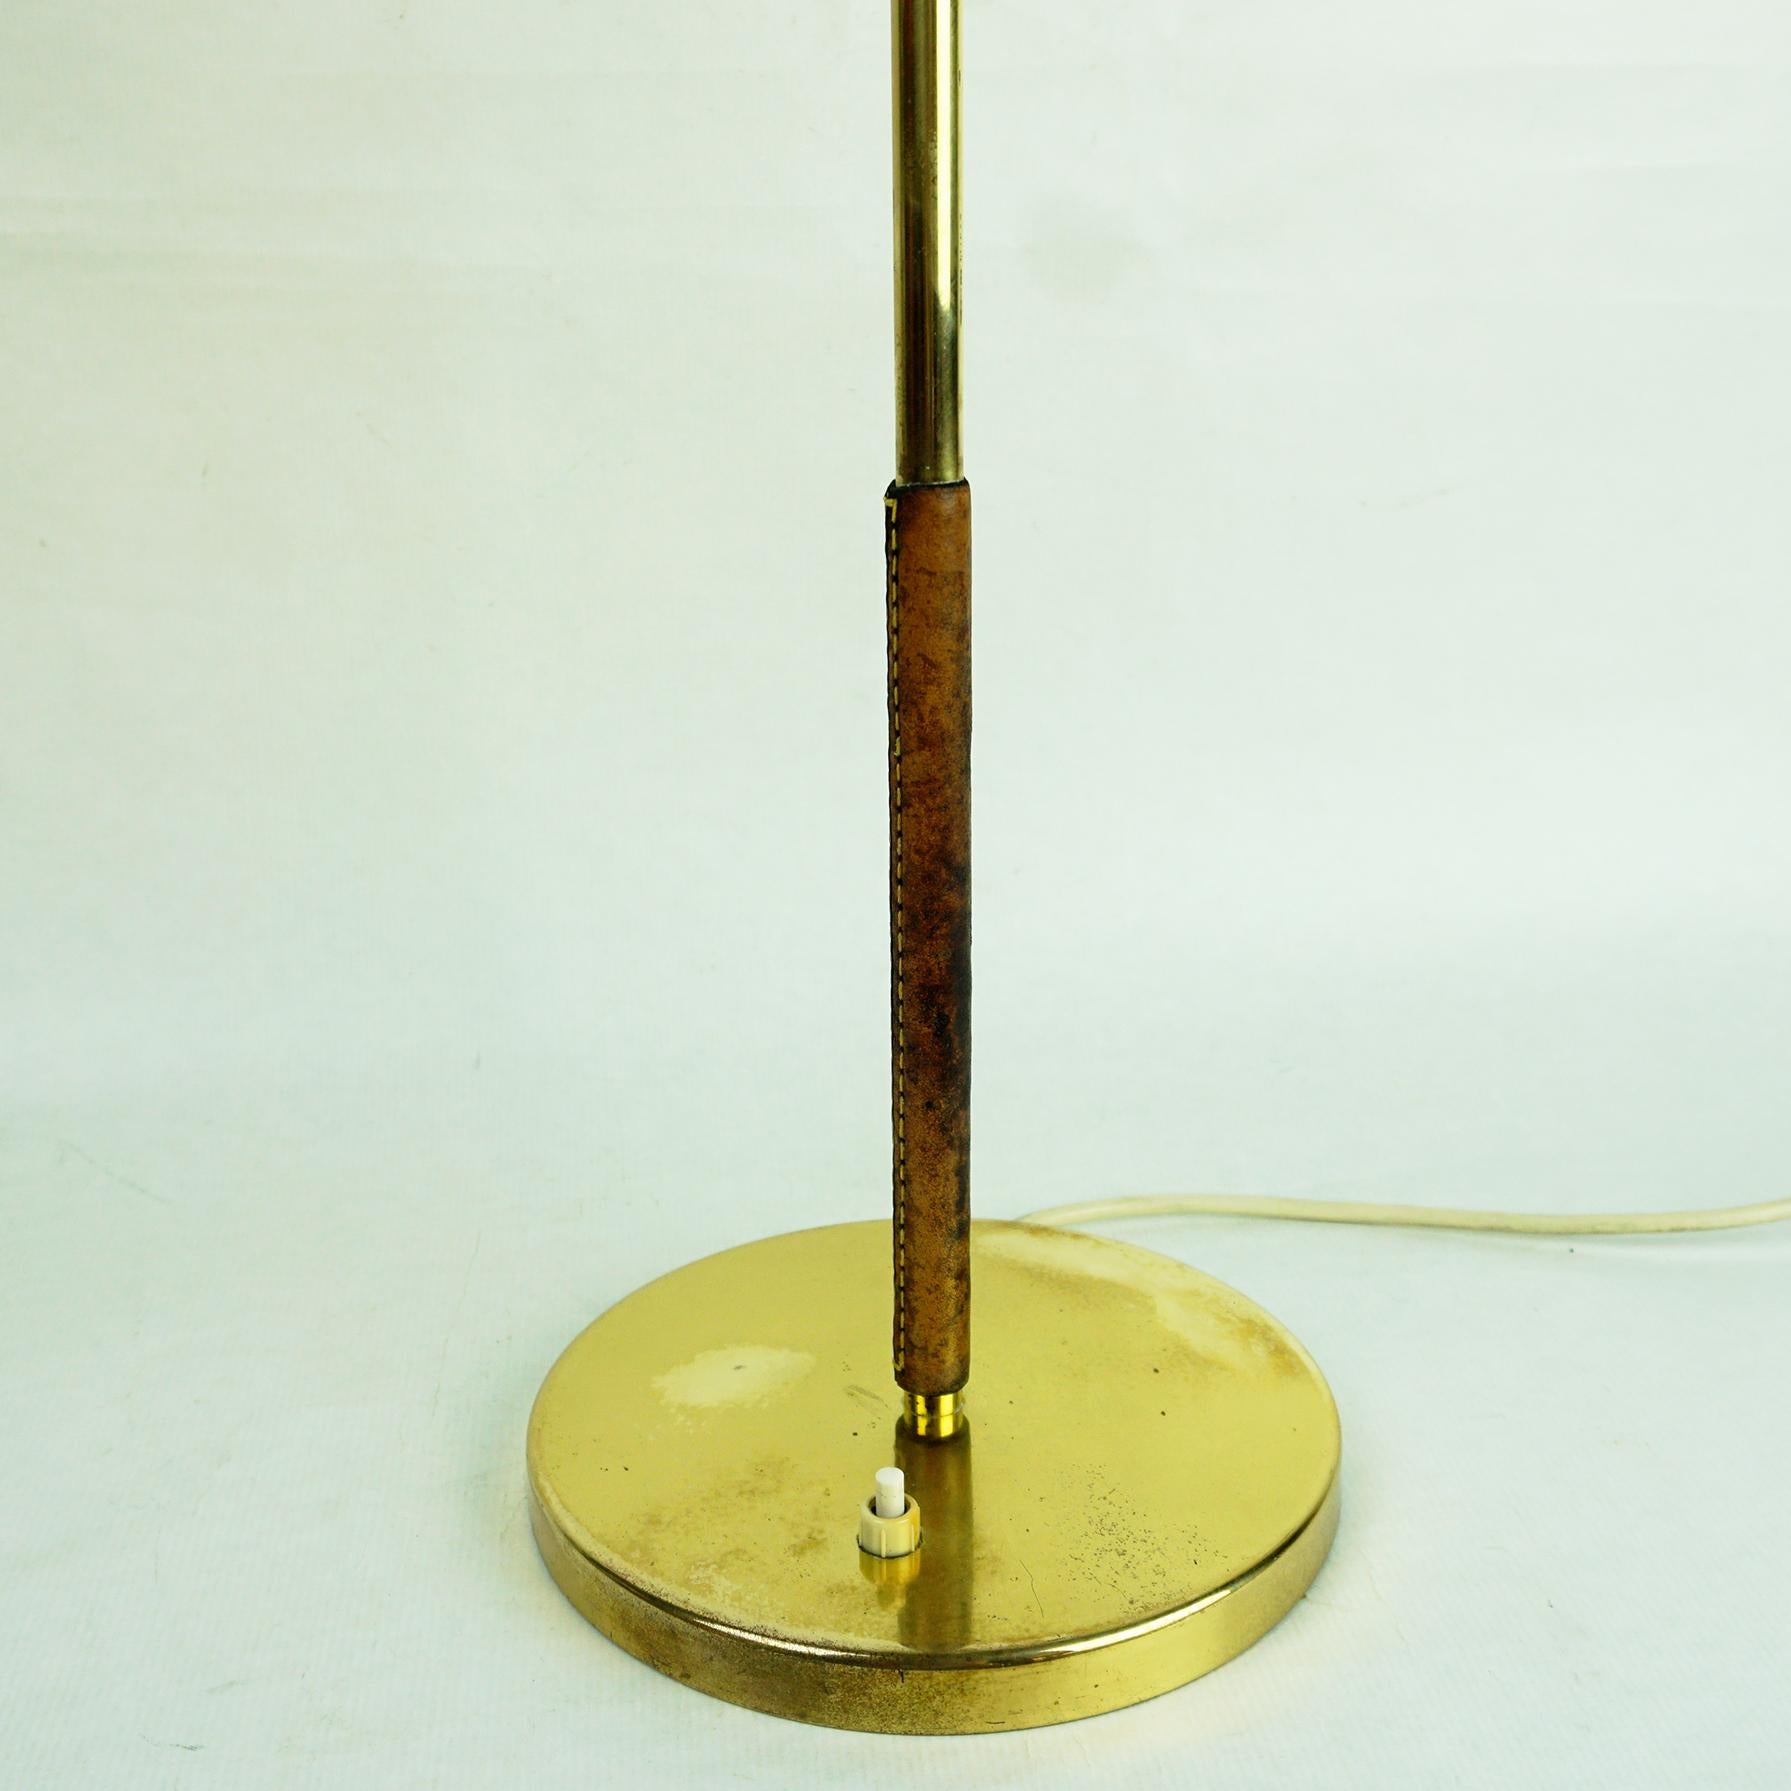 Austrian Midcentury Brass and Leather Table Lamp Mod. 1268 Essen by J. T. Kalmar For Sale 8